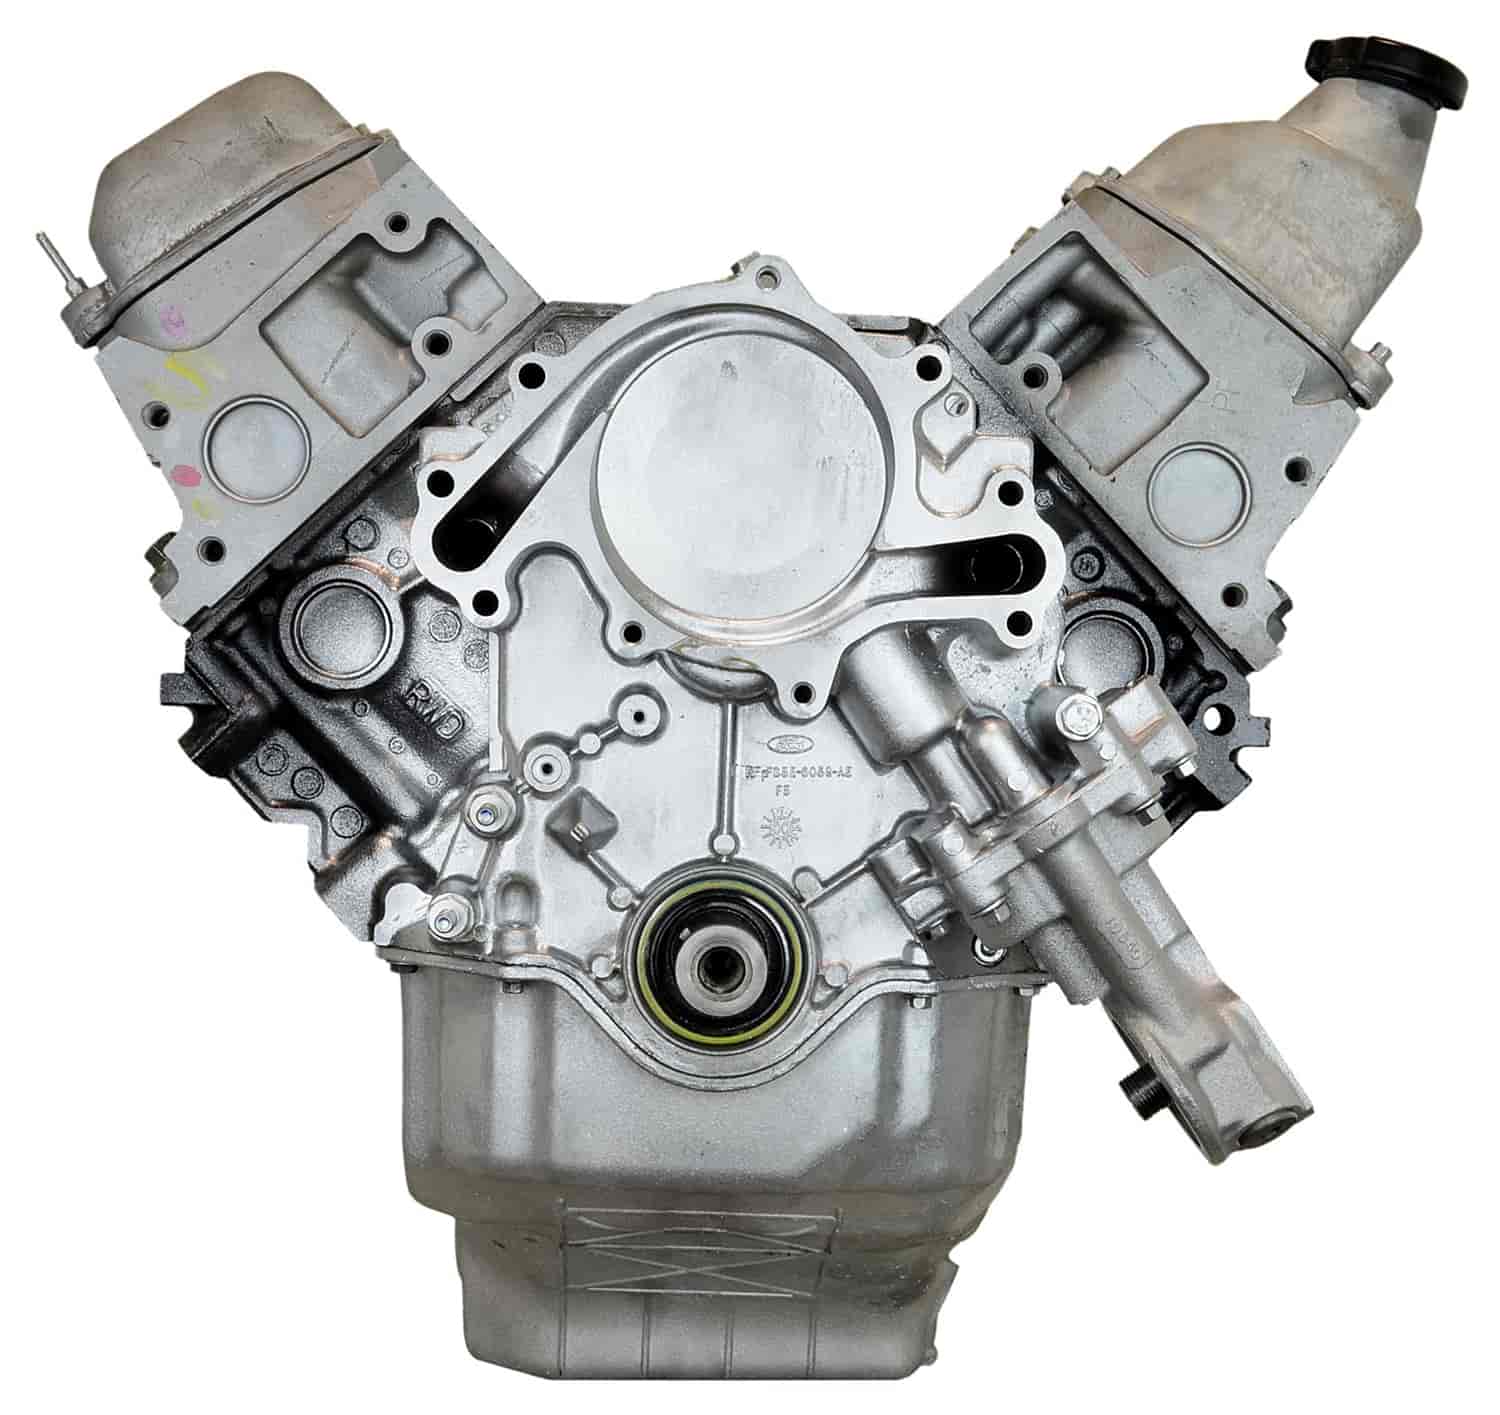 Remanufactured Crate Engine for 1999-2000 Ford F-Series Truck